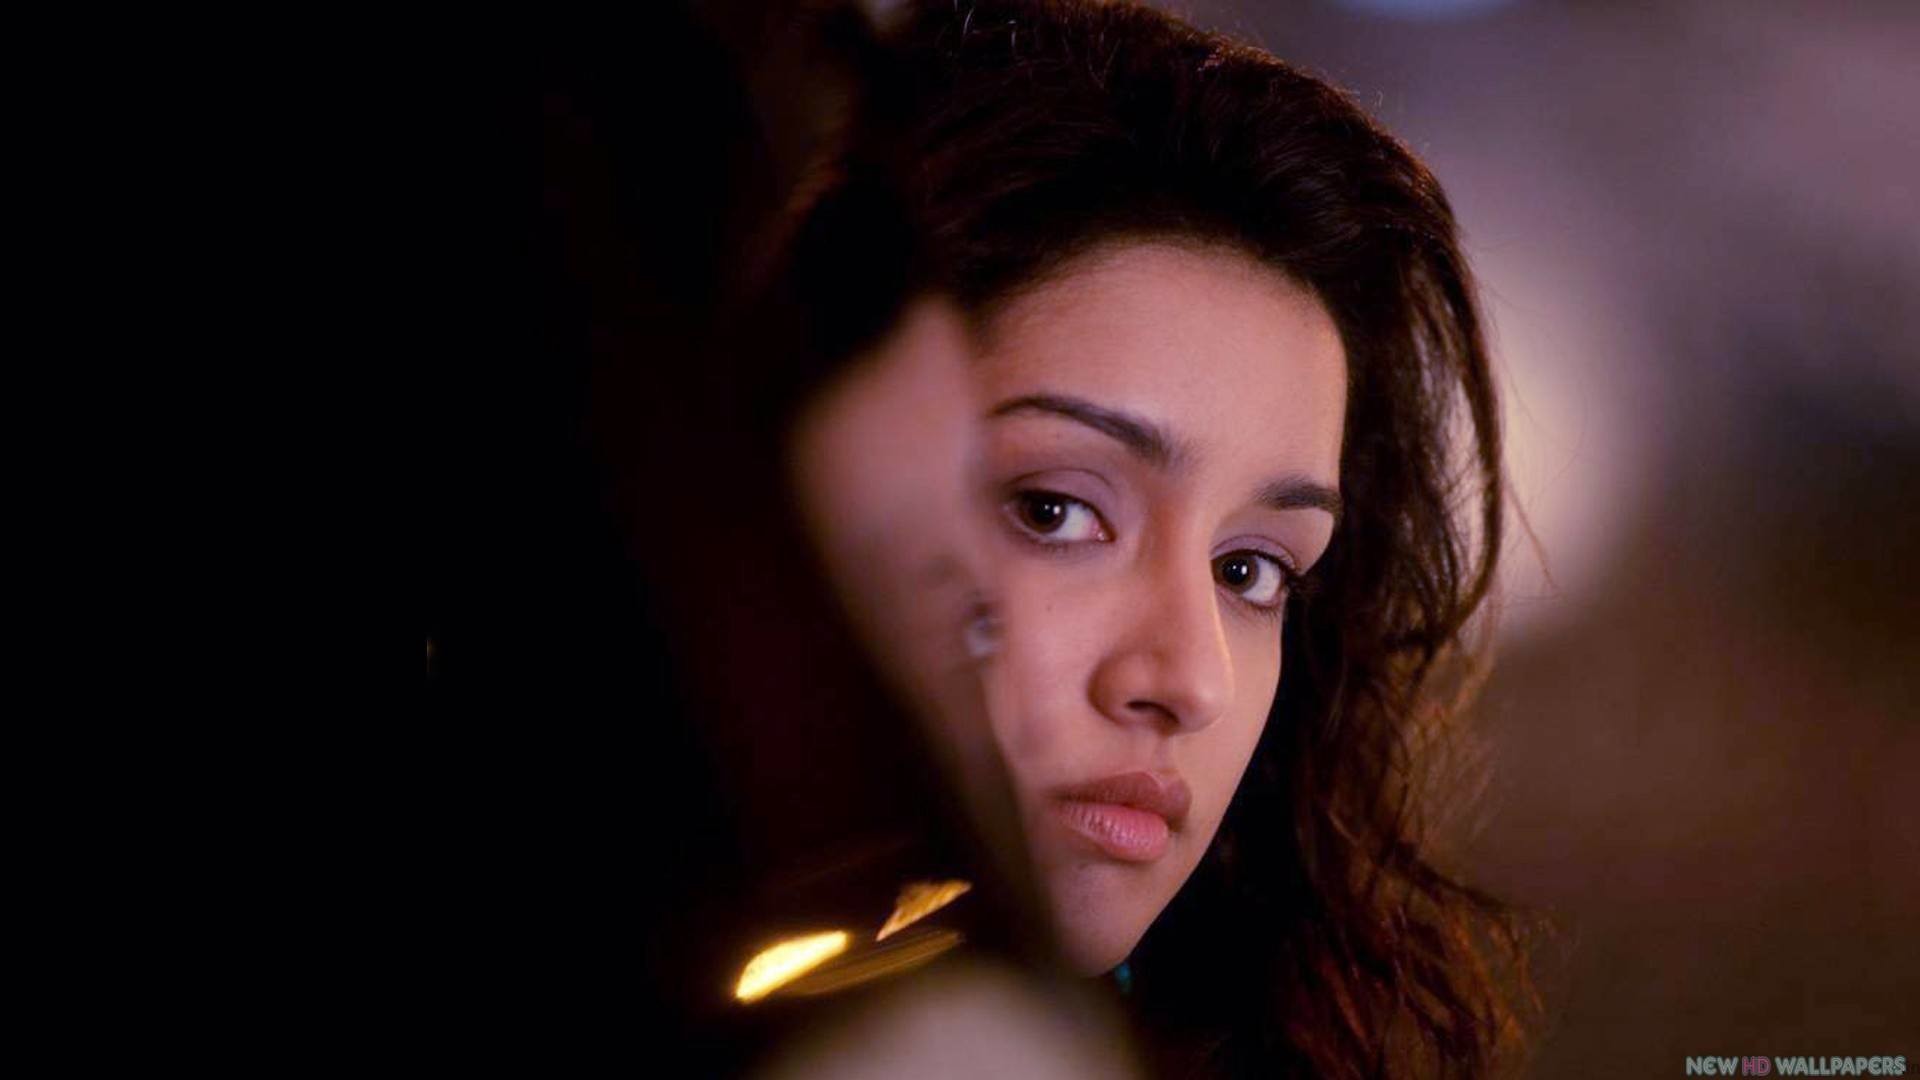 1920x1080 Here is a collection of the cute and bubbly Shraddha Kapoor images: